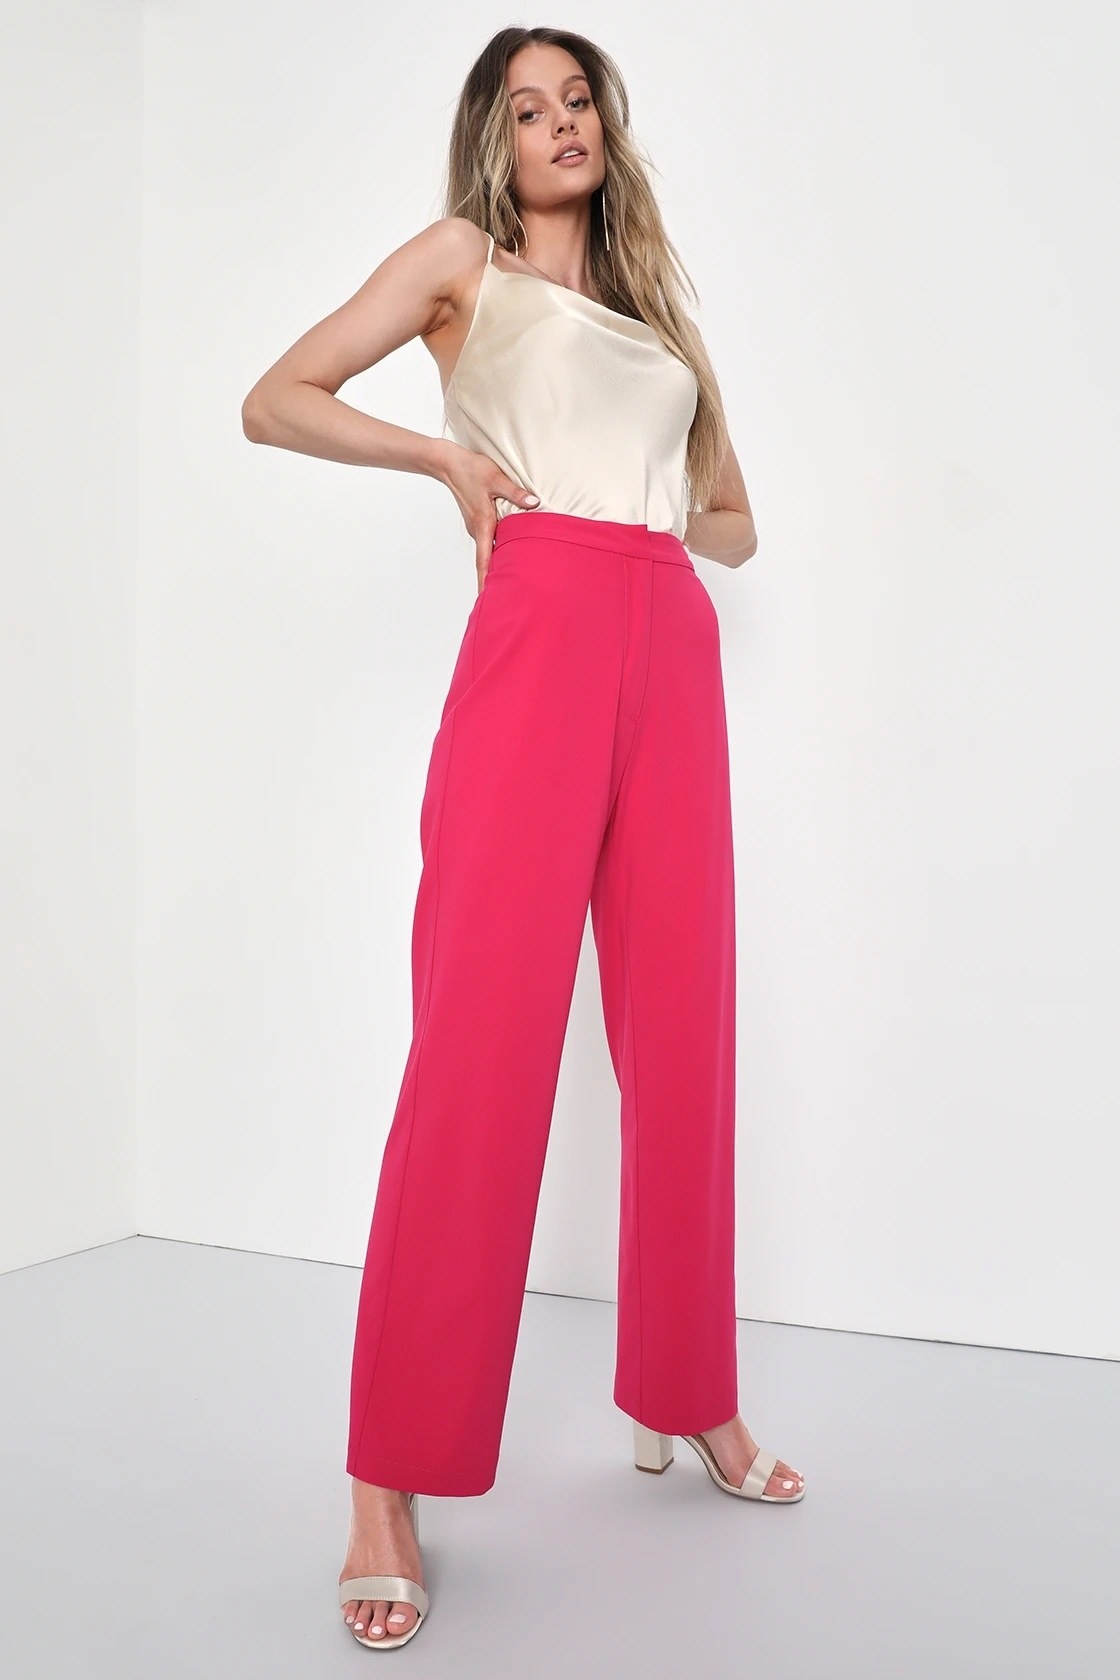 A model wearing a white camisole with pink trousers and champagne shoes